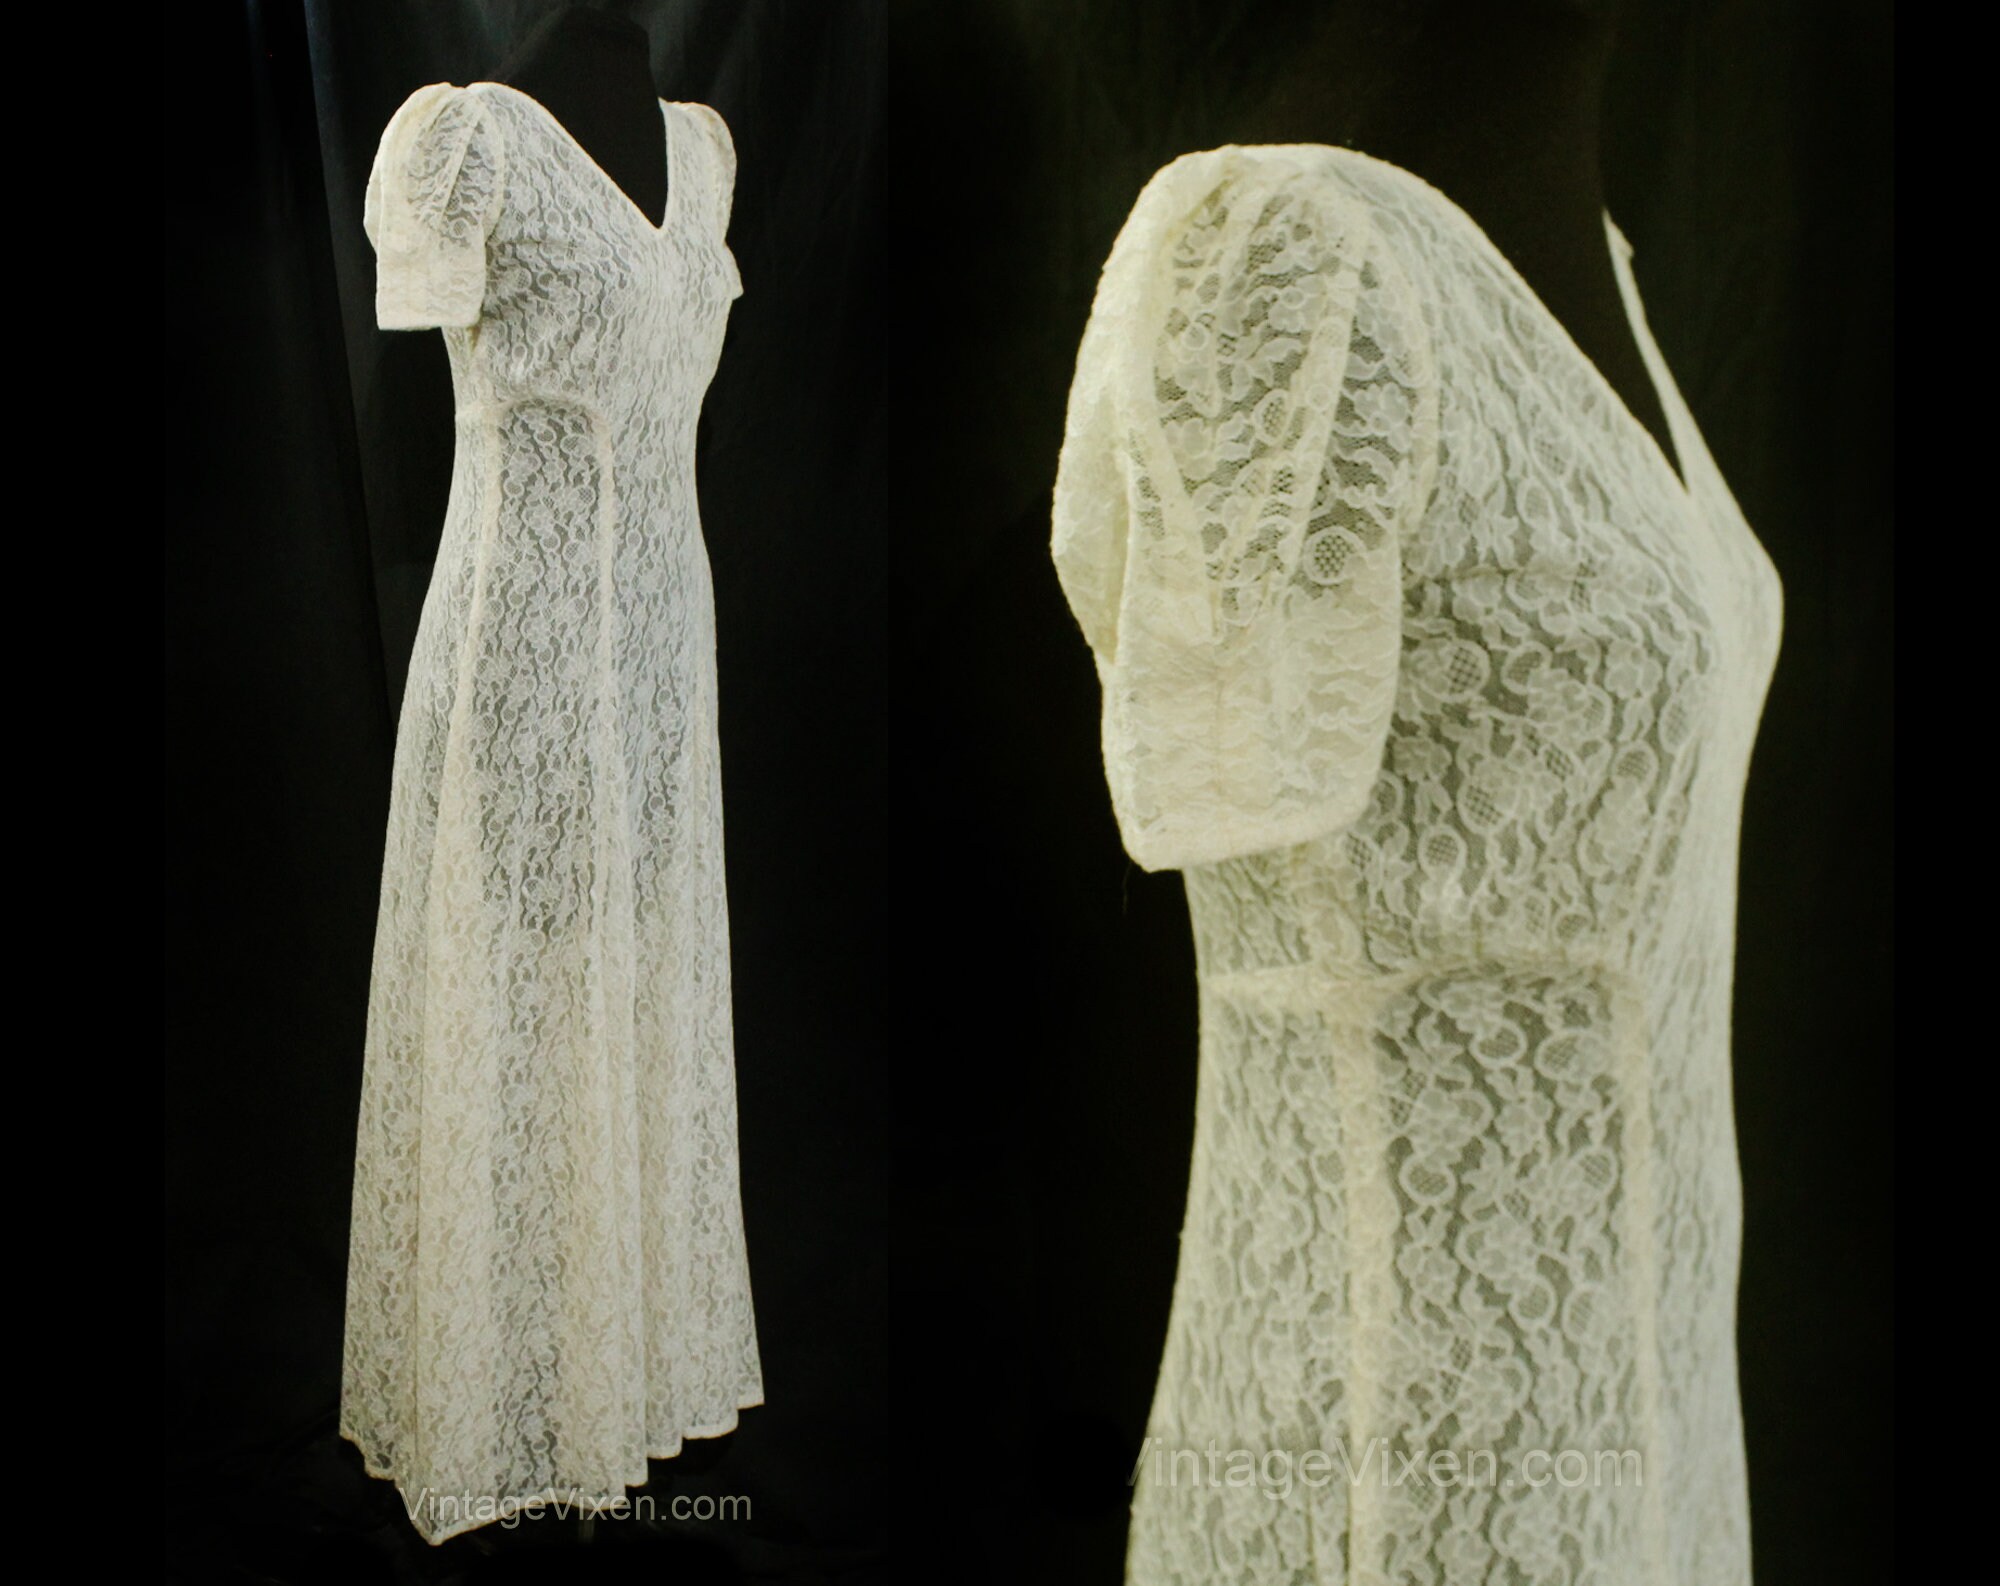 Size 8 1930s Dress Medium Bust 36 Puff Sleeves & Full Skirt Sheer Cream Floral Net Lace Evening Gown Authentic 30s See Through Frock